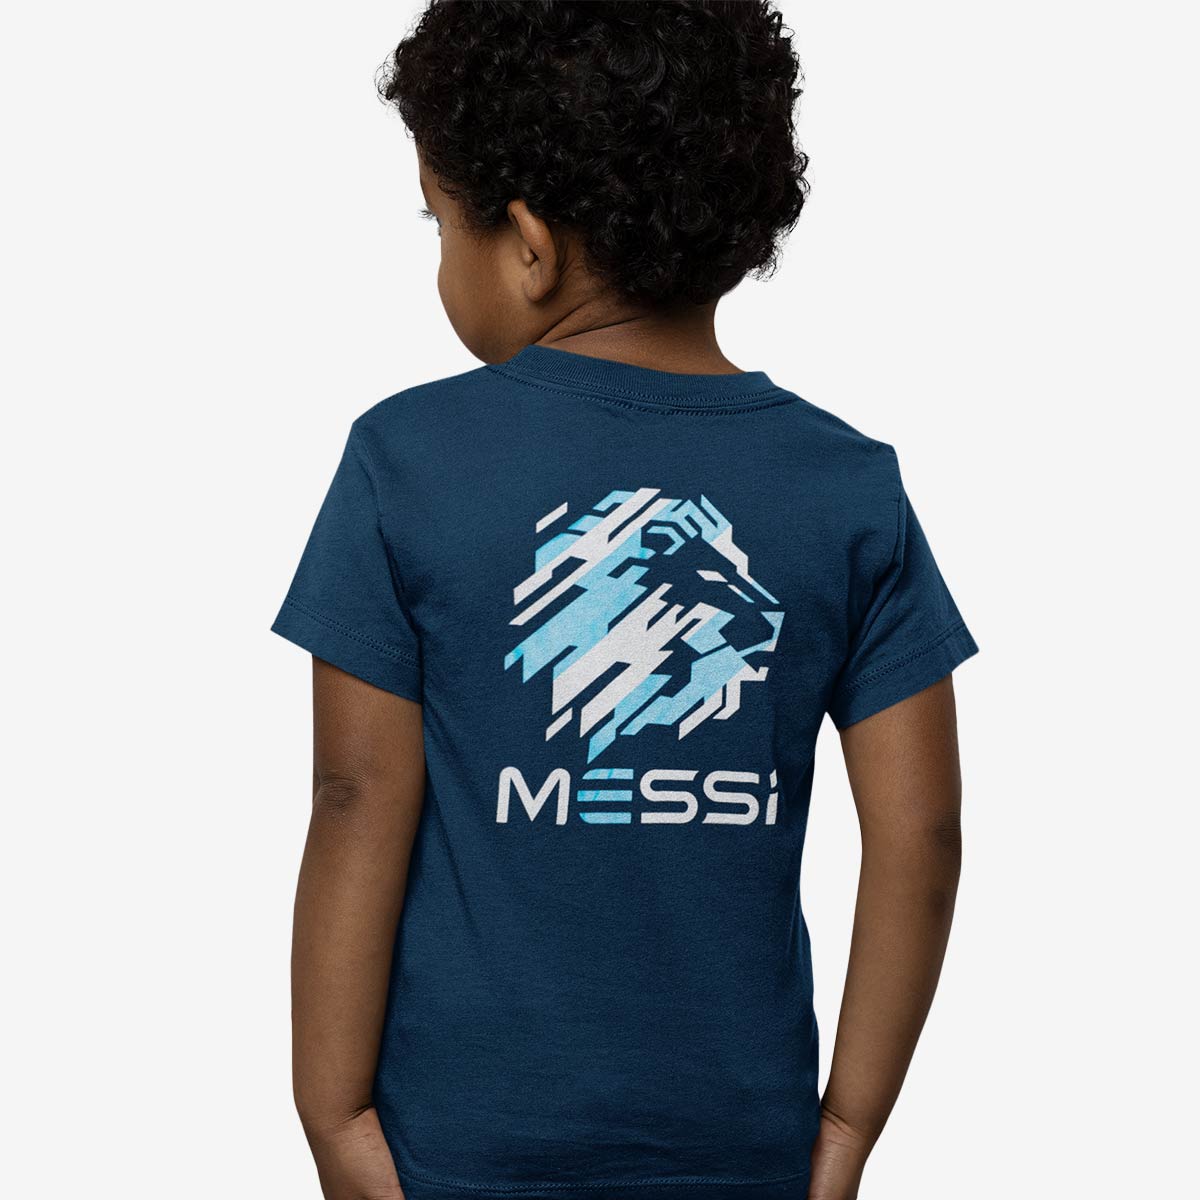 Messi Youth Fit Navy Tee image number 1